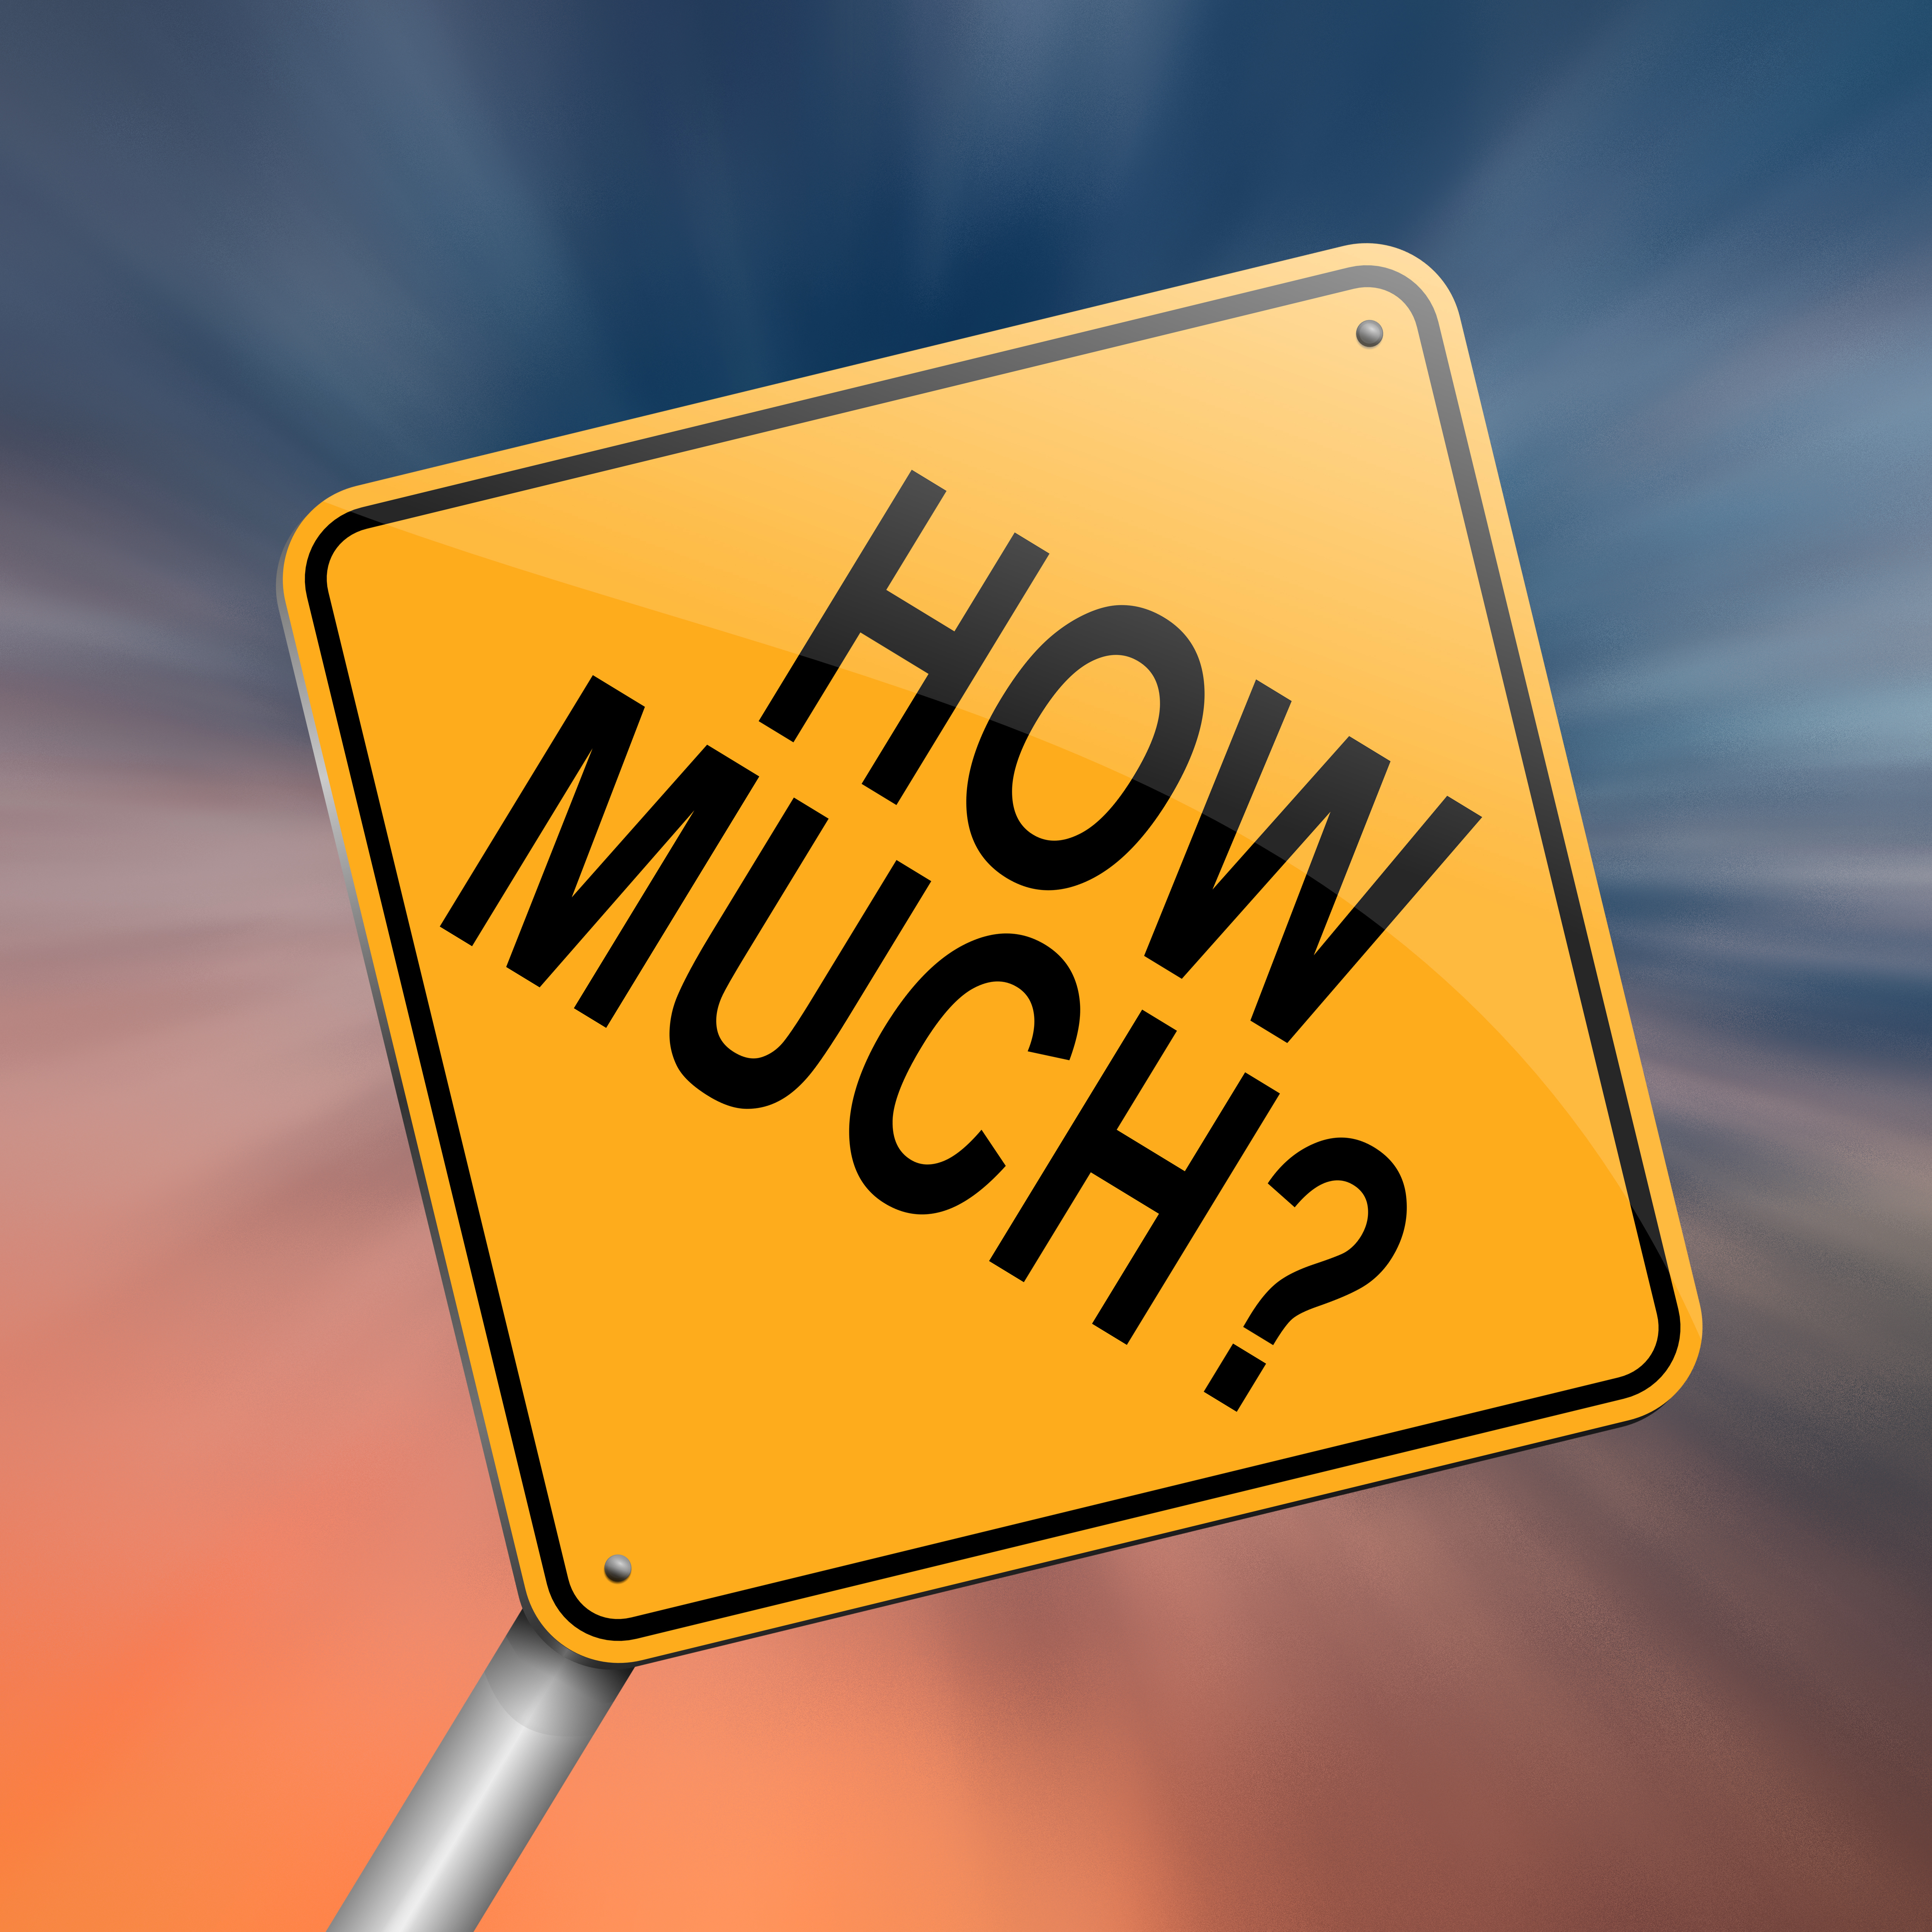 The words "how much?" on a yield sign to show double meaning of the cost of conflict.